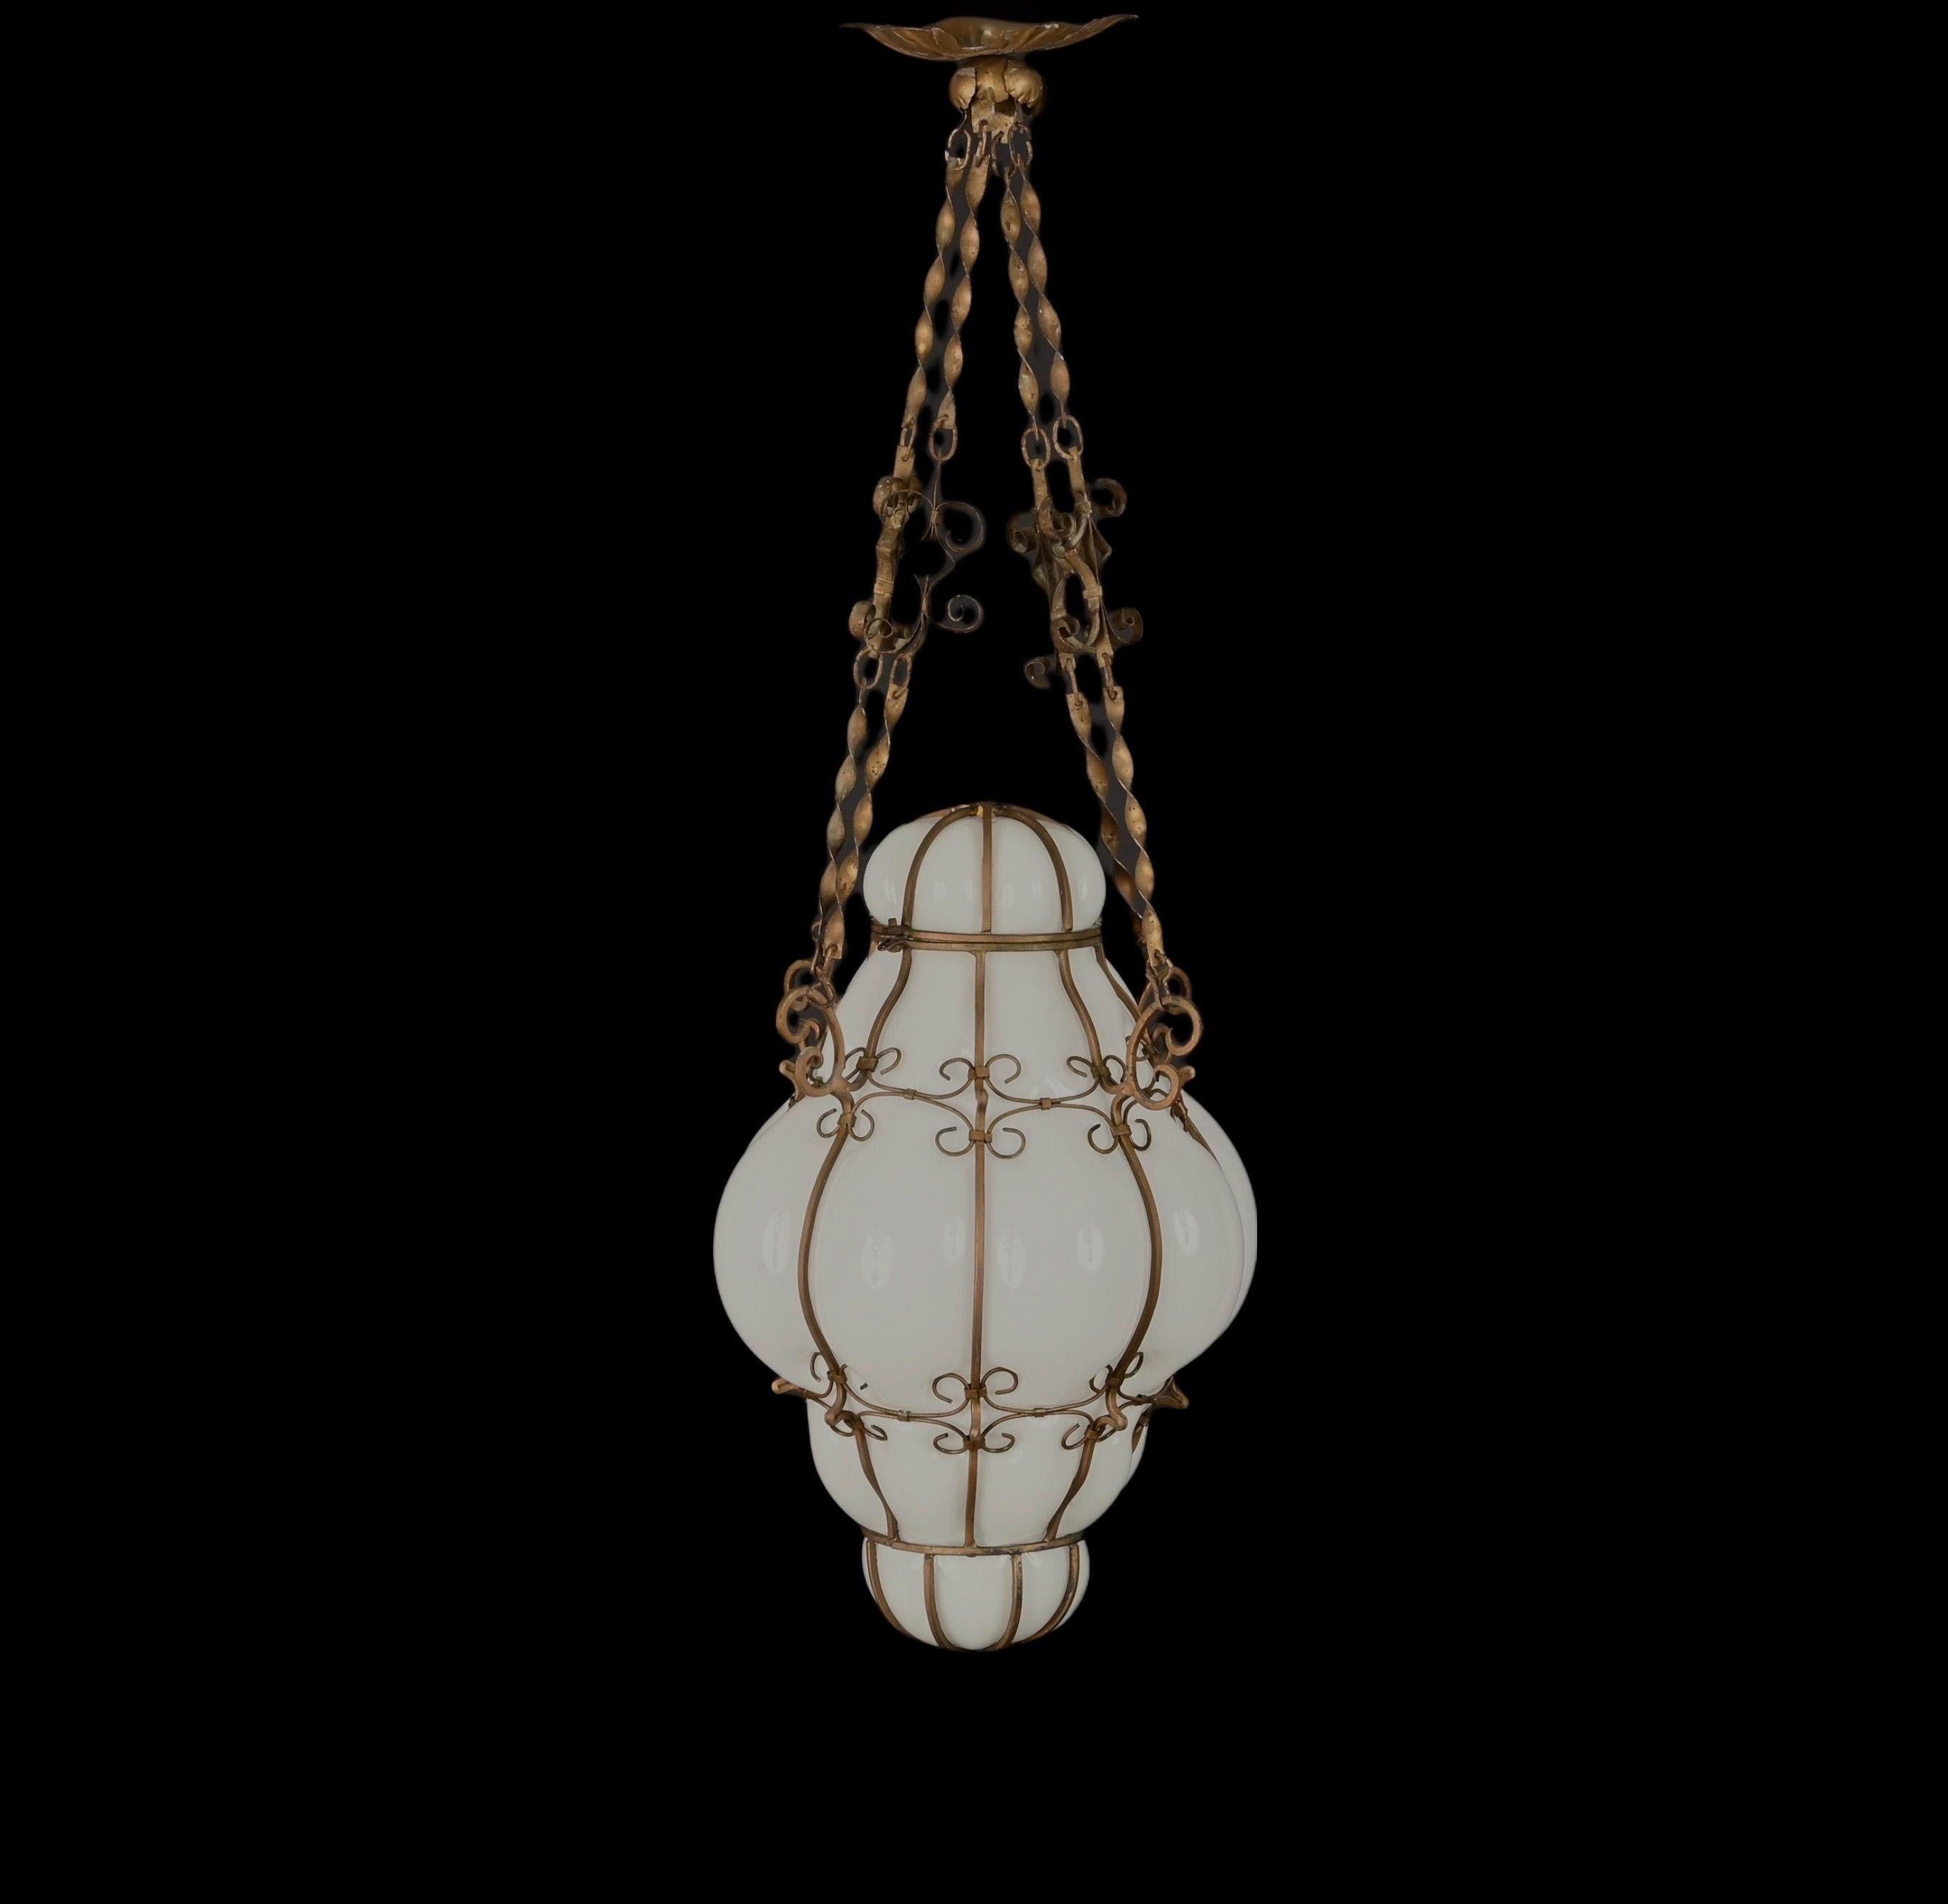 Midcentury Venetian Brass and Mouth Blown Murano White Glass Chandelier, 1940s For Sale 2